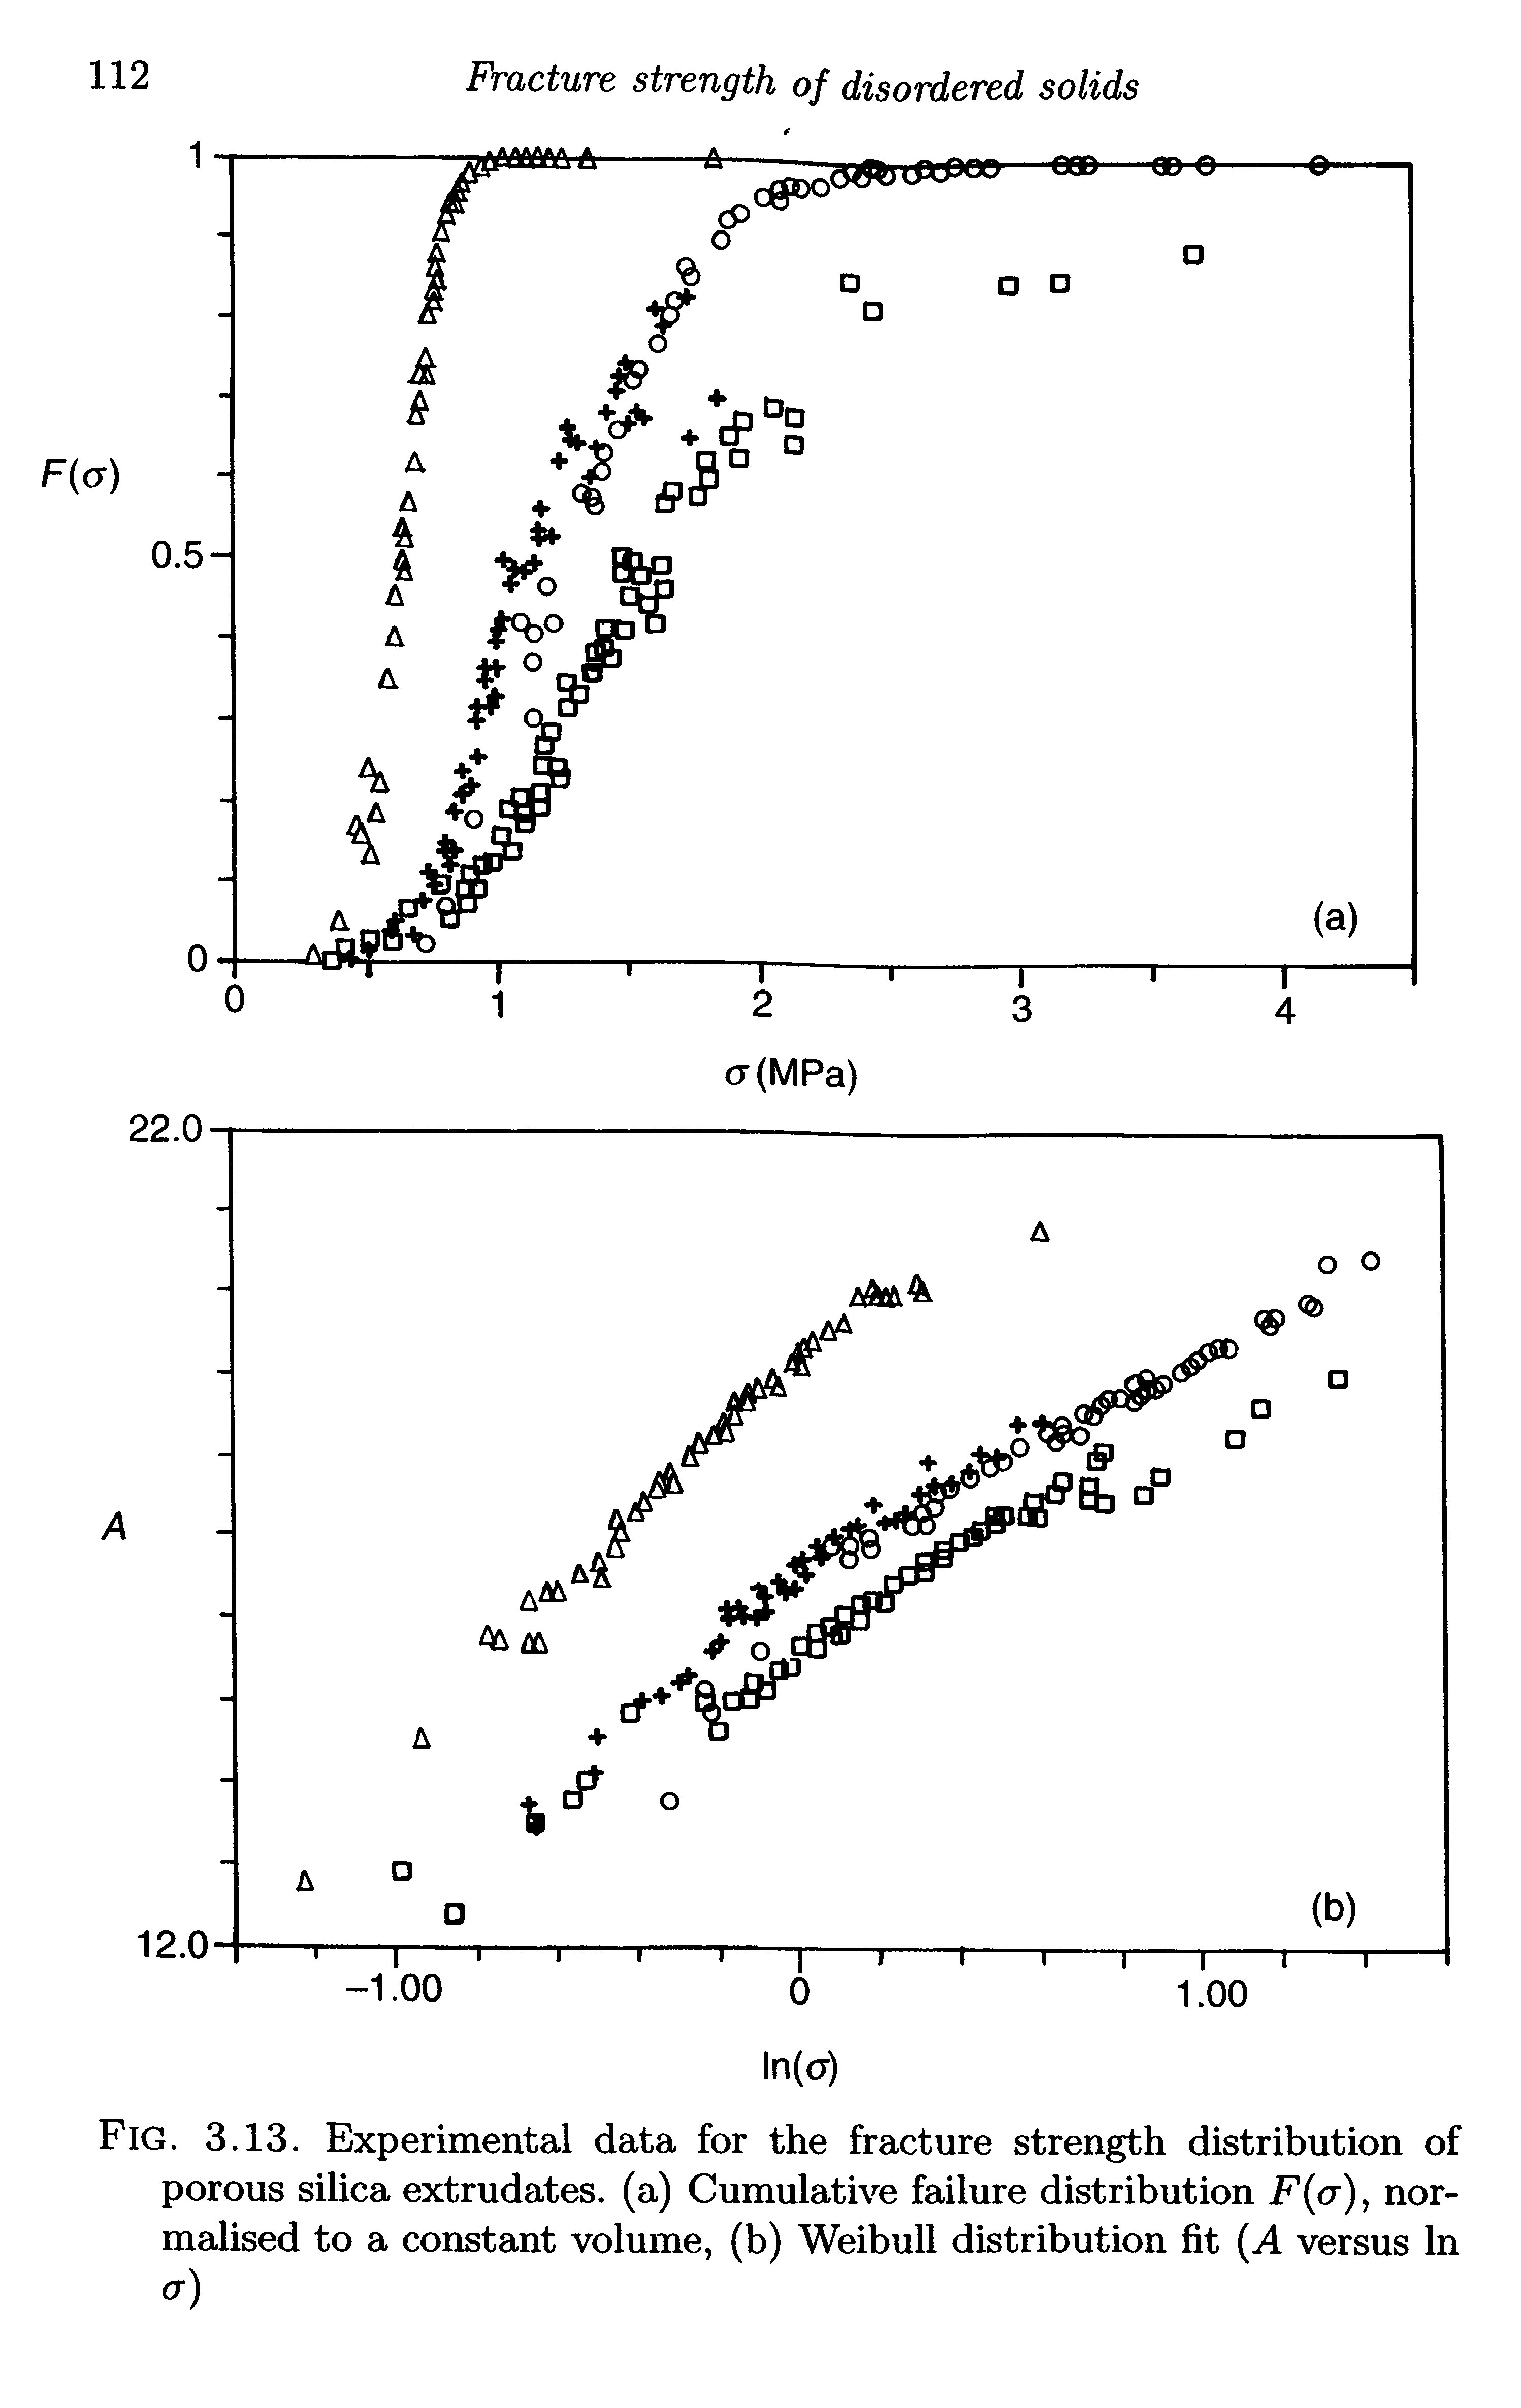 Fig. 3.13. Experimental data for the fracture strength distribution of porous silica extrudates. (a) Cumulative failure distribution F a), normalised to a constant volume, (b) Weibull distribution fit A versus In...